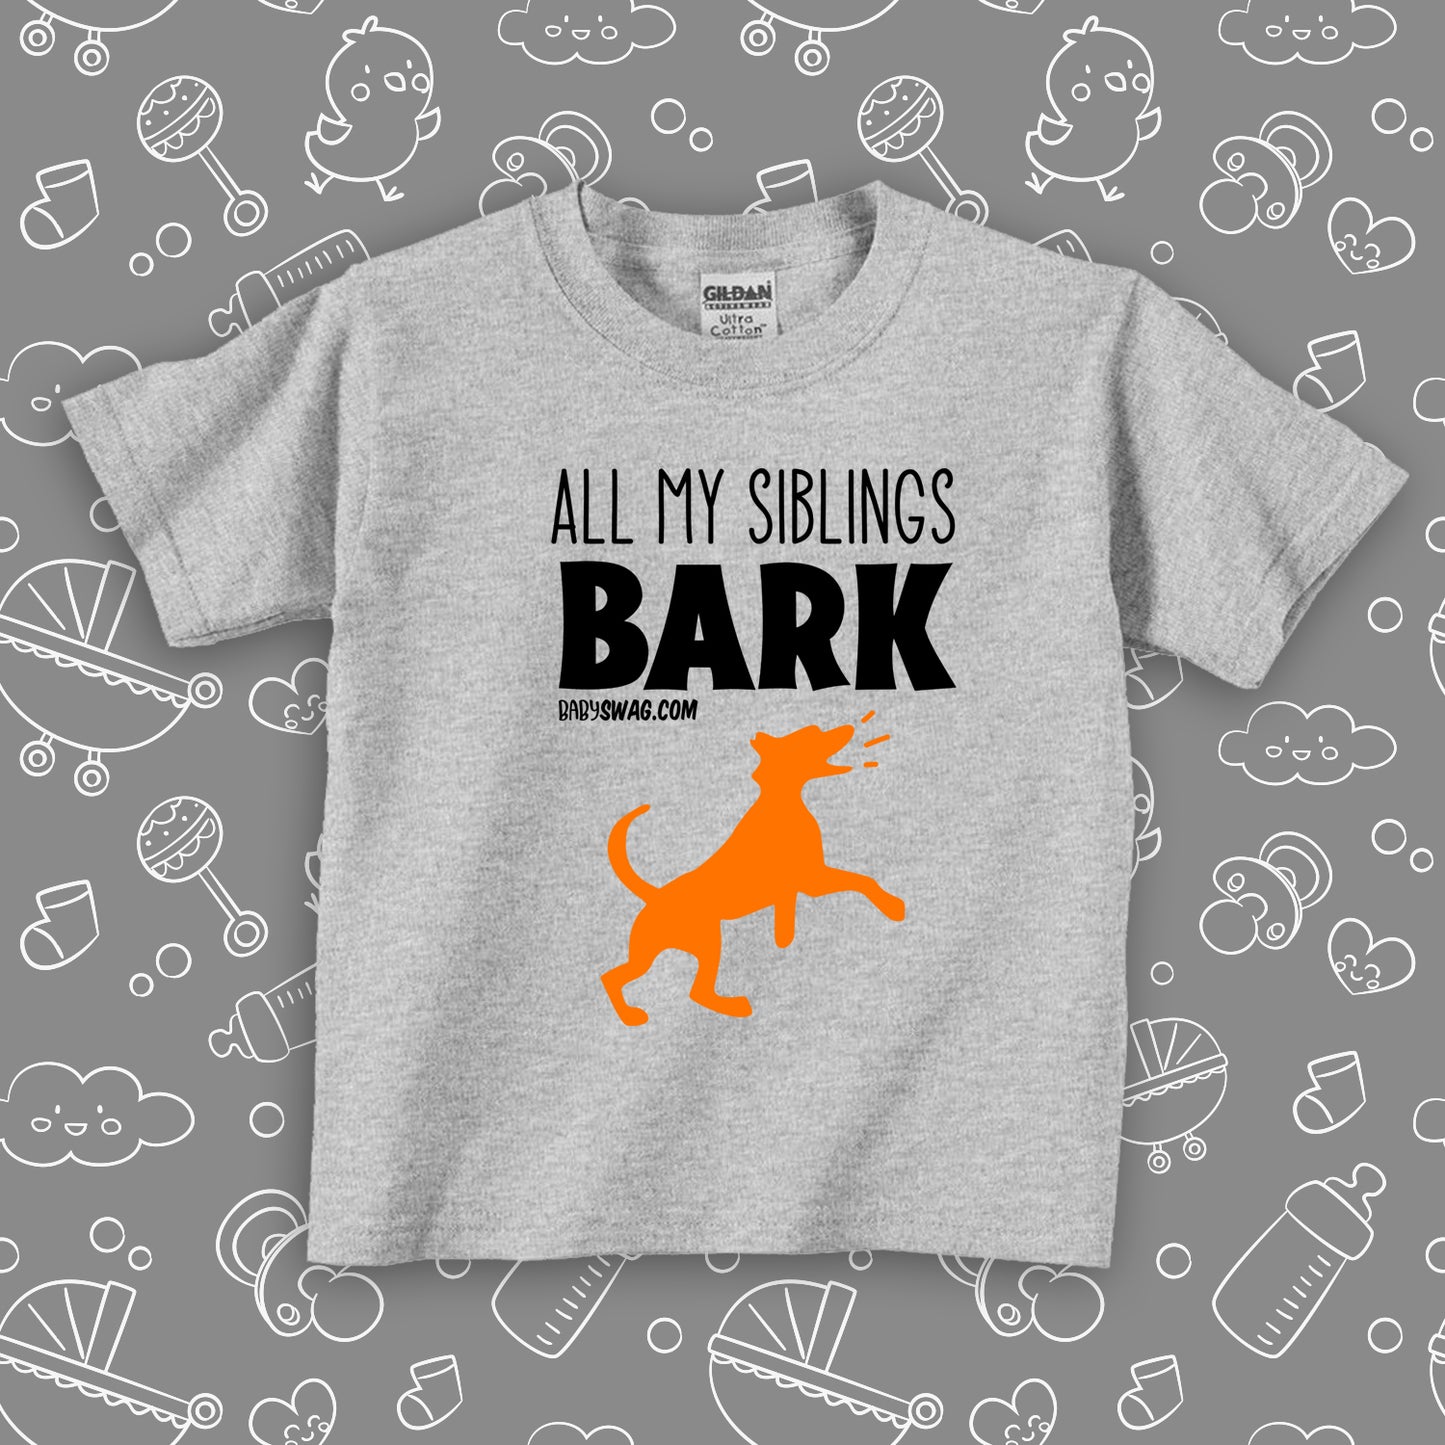 Cute toddler shirts with saying "My Siblings All Bark" in grey. 